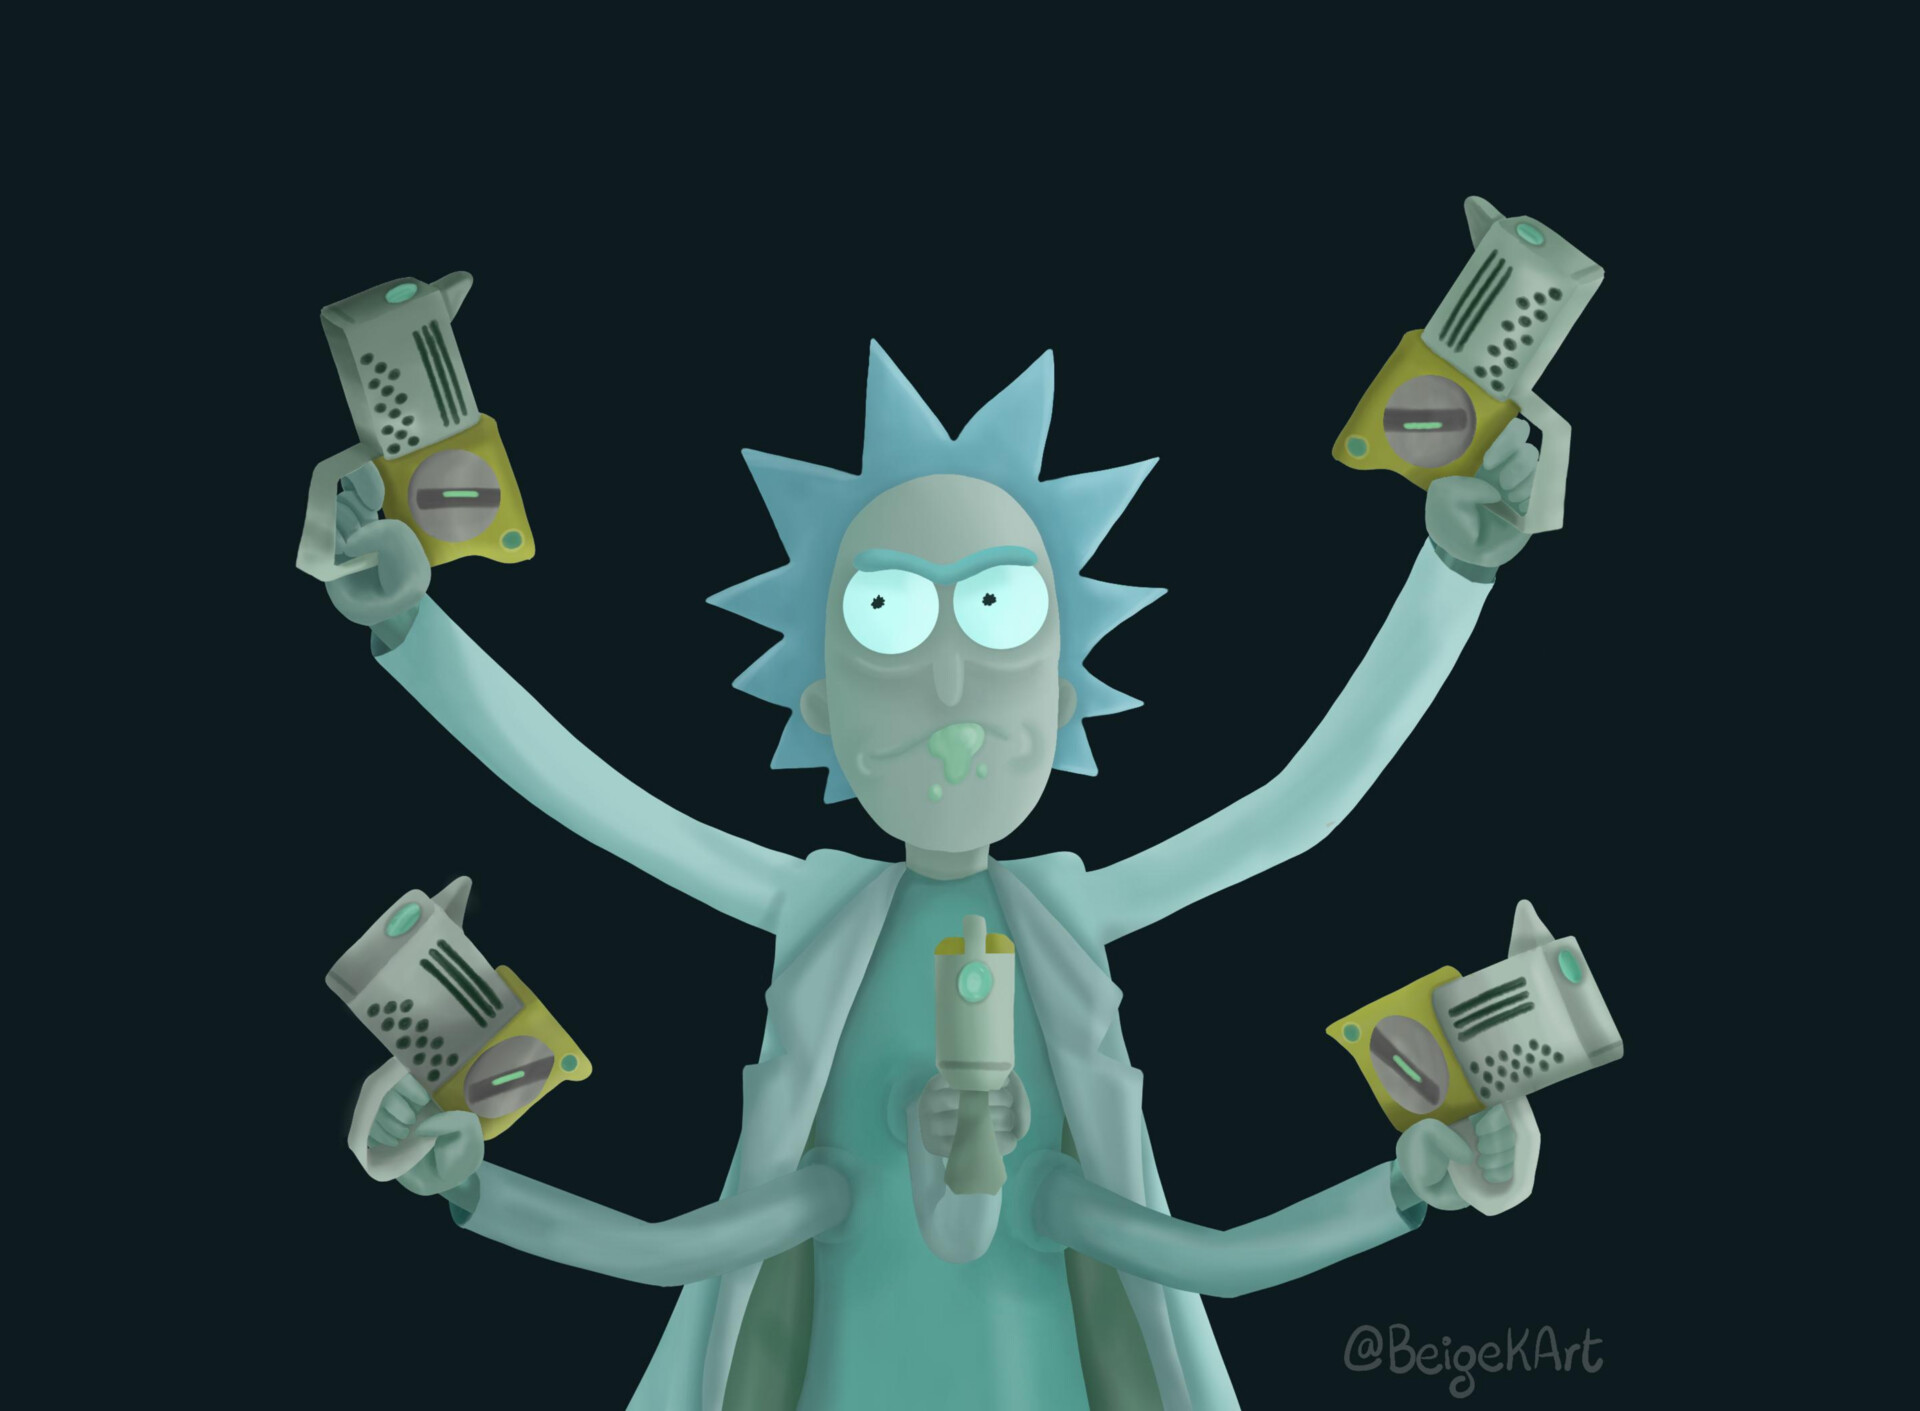 rick and morty middle finger drawing